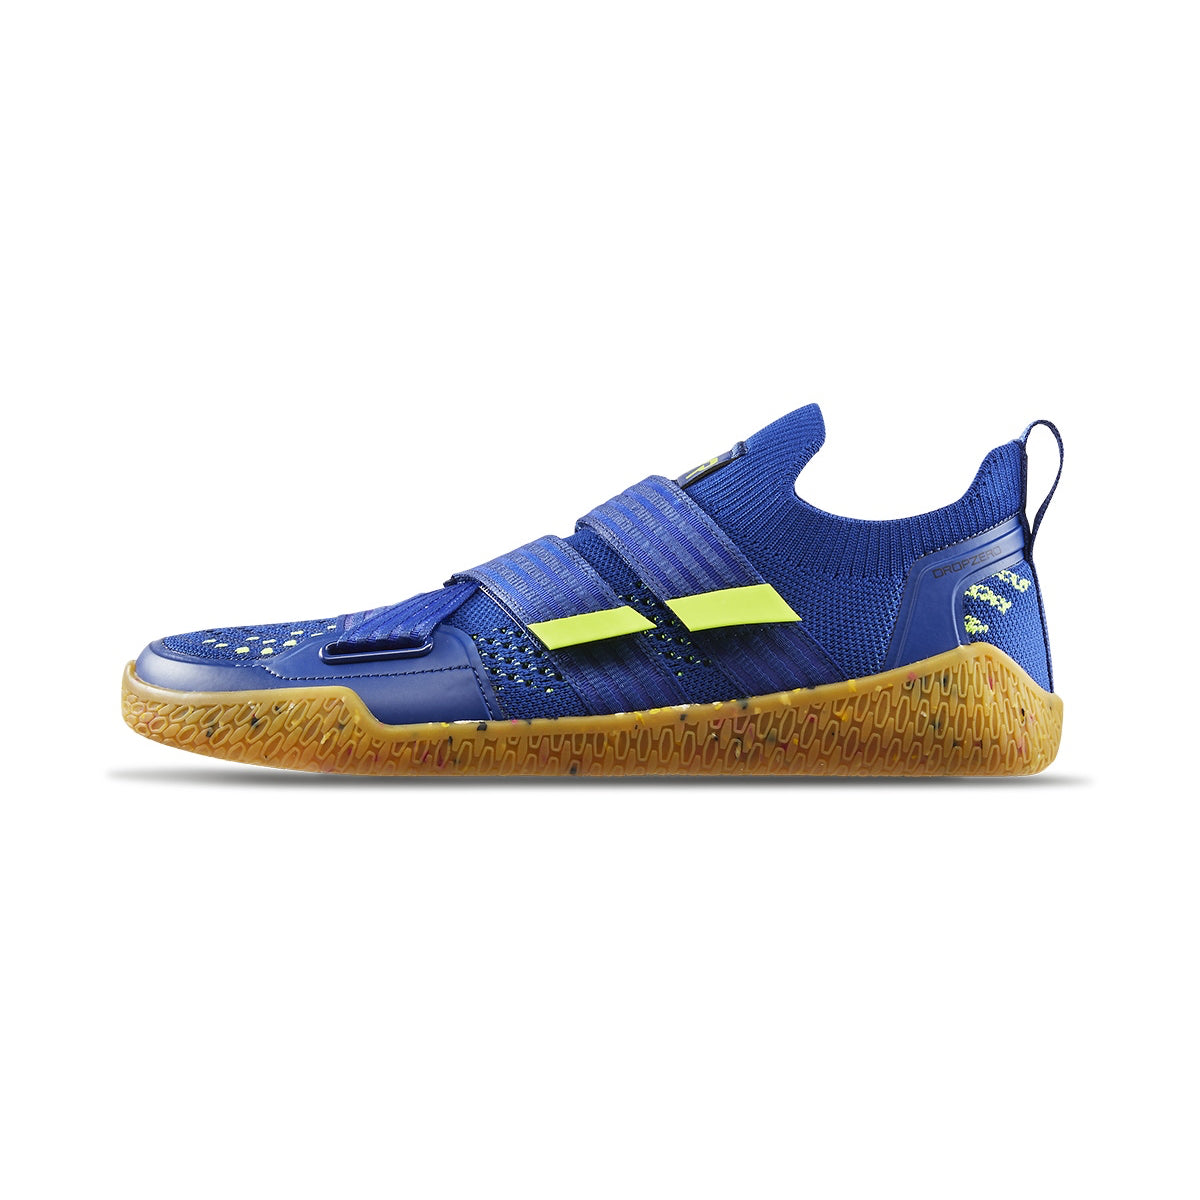 TYR DZ-1 DropZero Barefoot Trainer Shoes (489 Royal/Lime)